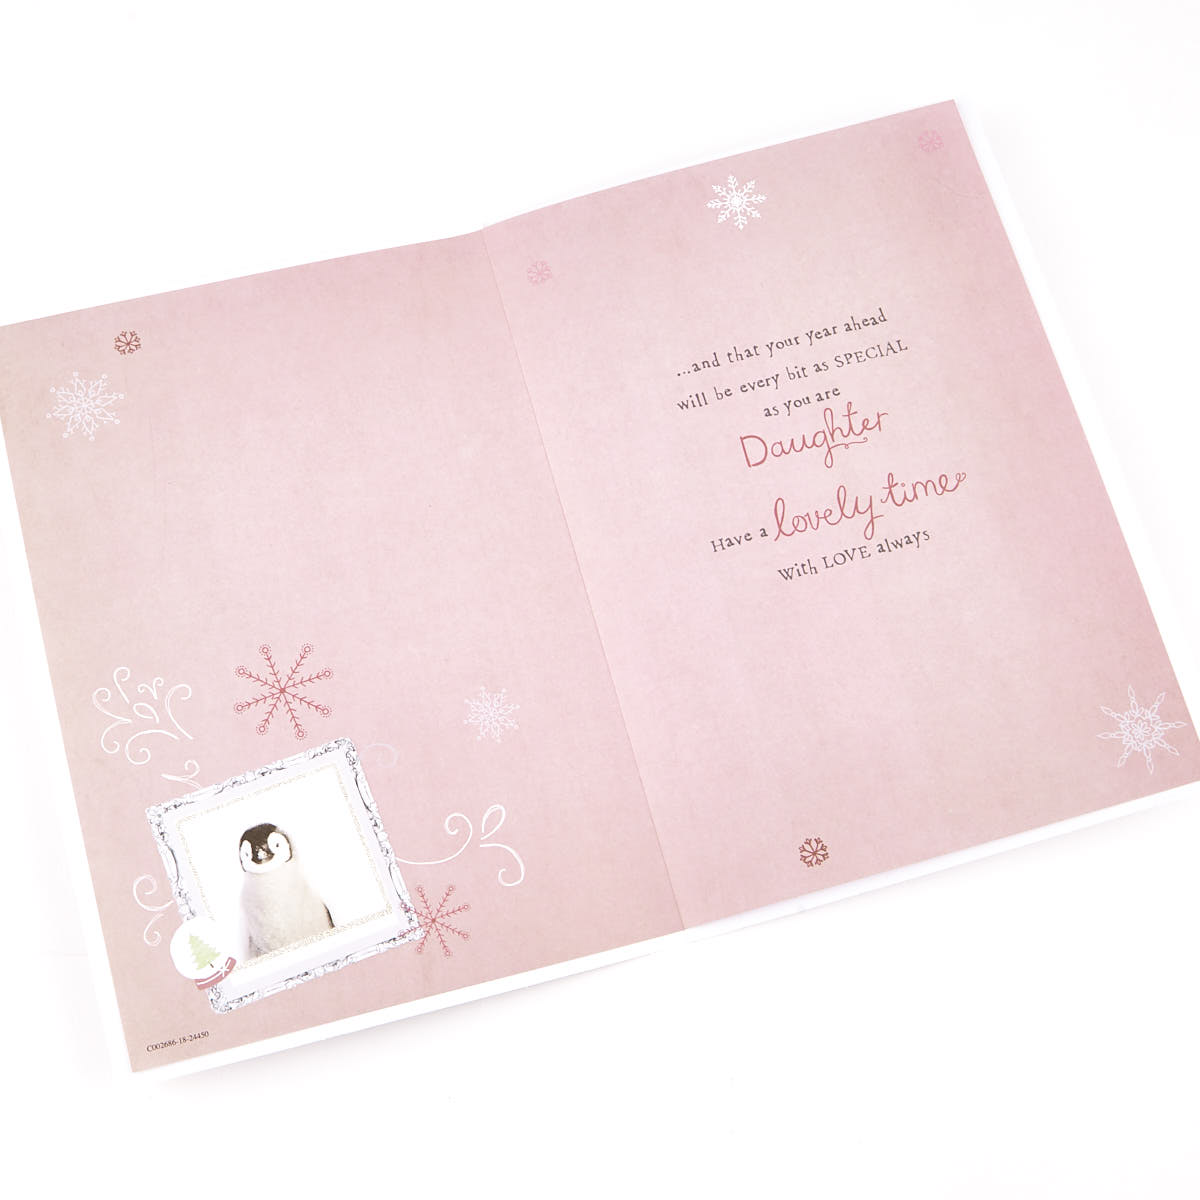 Signature Collection Christmas Card - Daughter Penguin